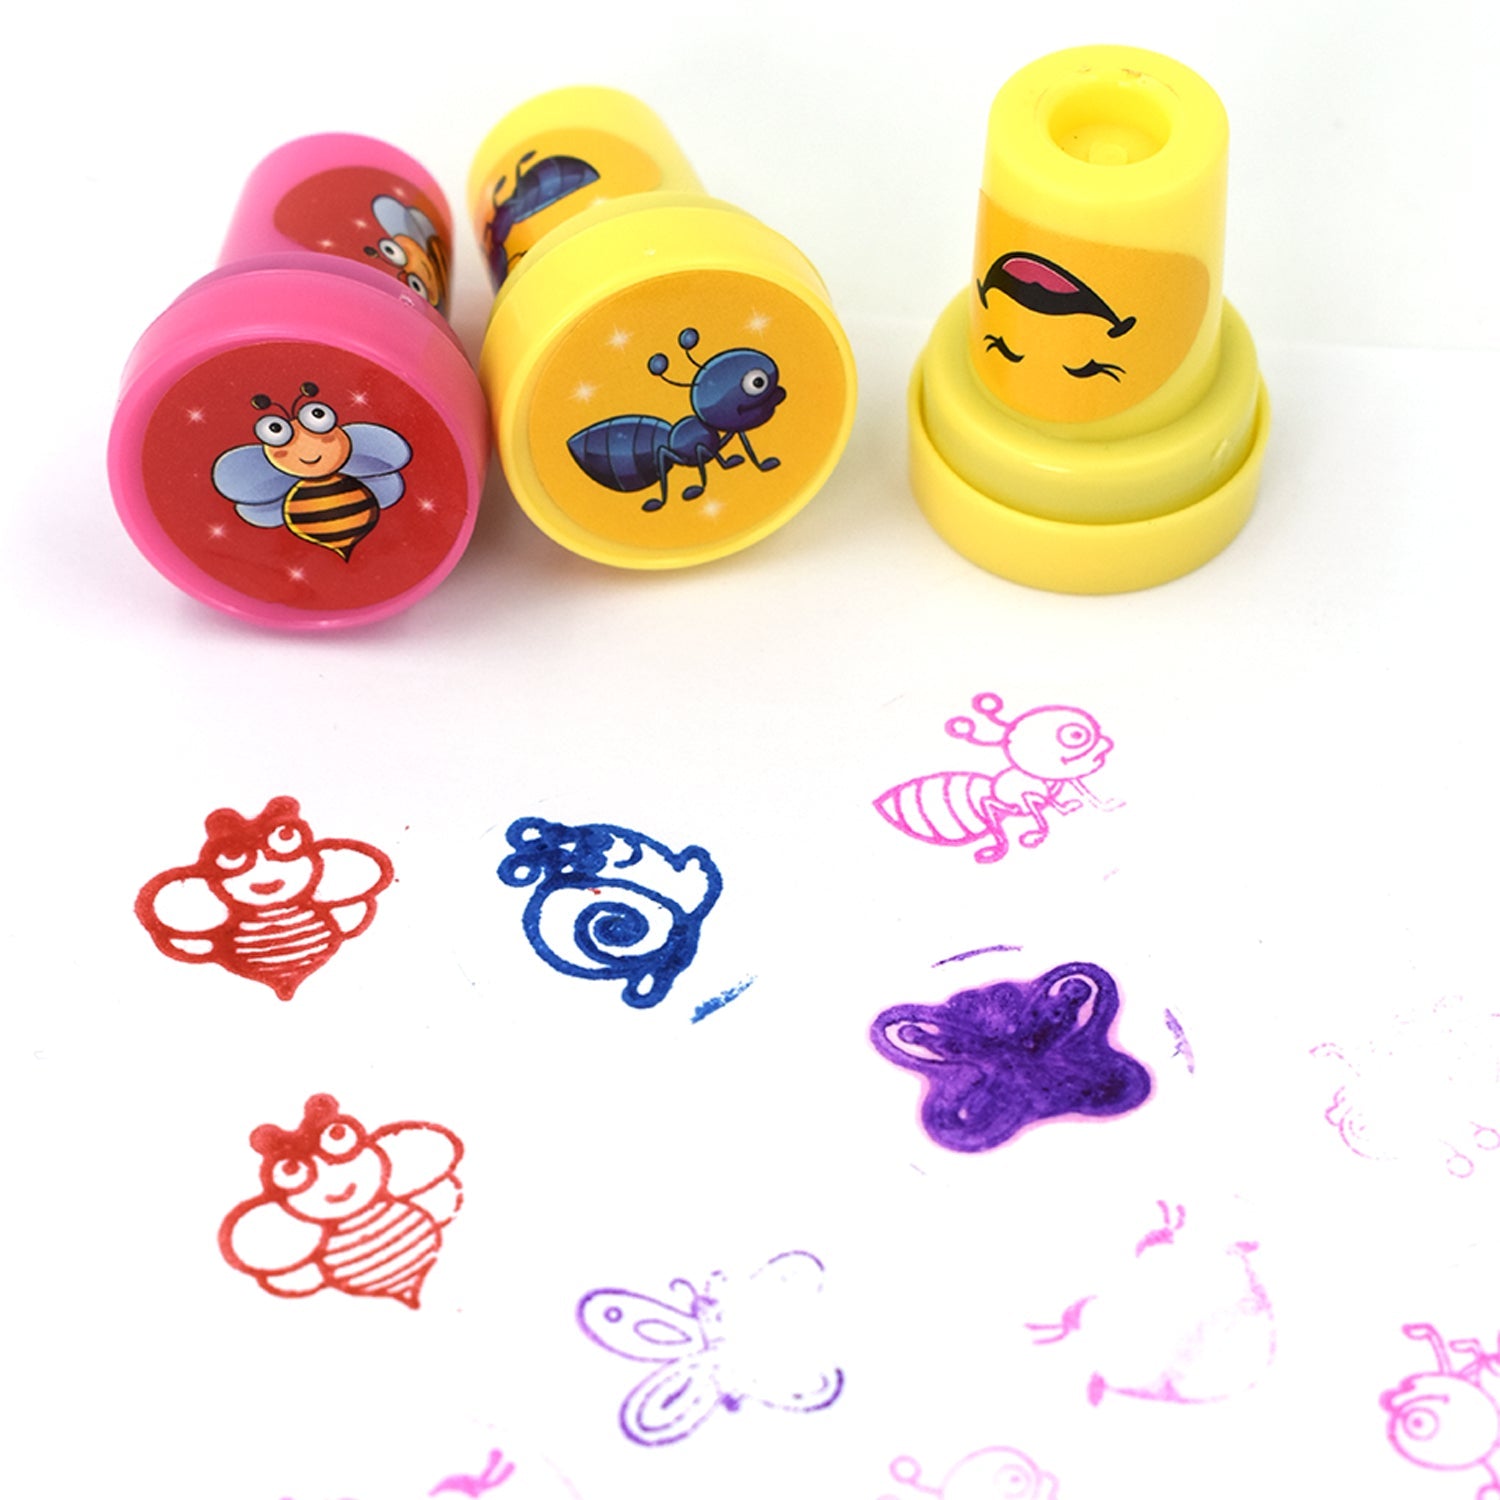 4805 12 Pc Stamp Set used in all types of household places by kids and children’s for playing purposes. 